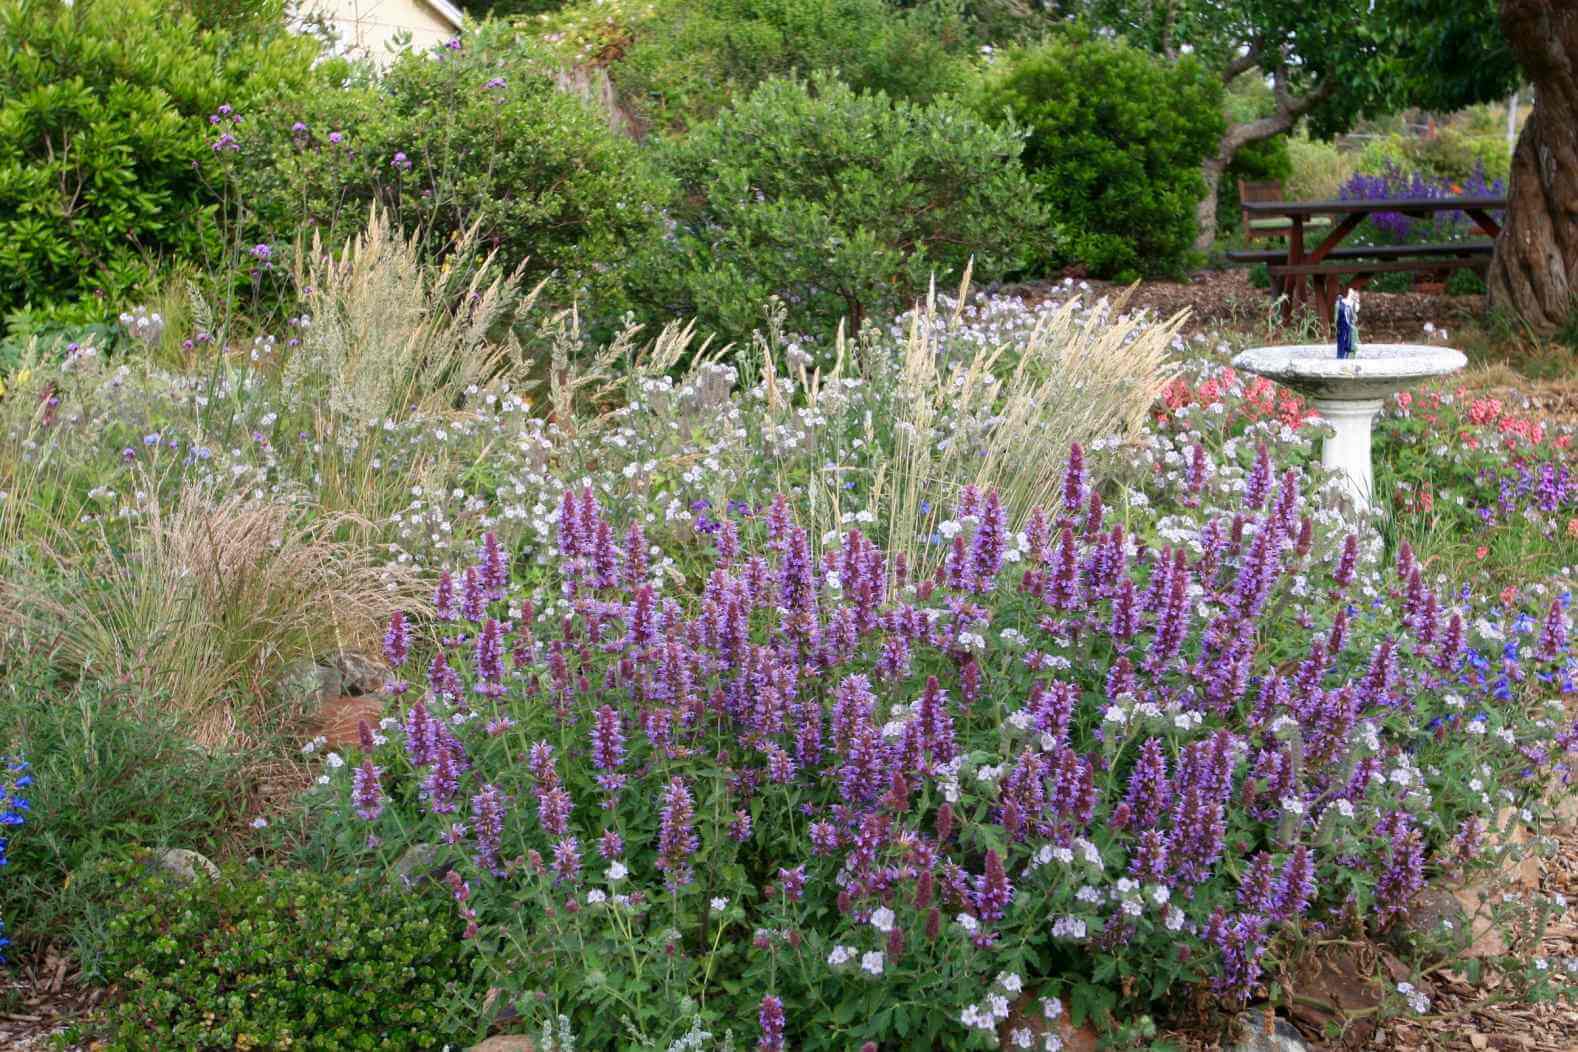 A large patch of Agastache provides nectar for hummingbirds and bees (Photo © Suzi Katz Garden Design)